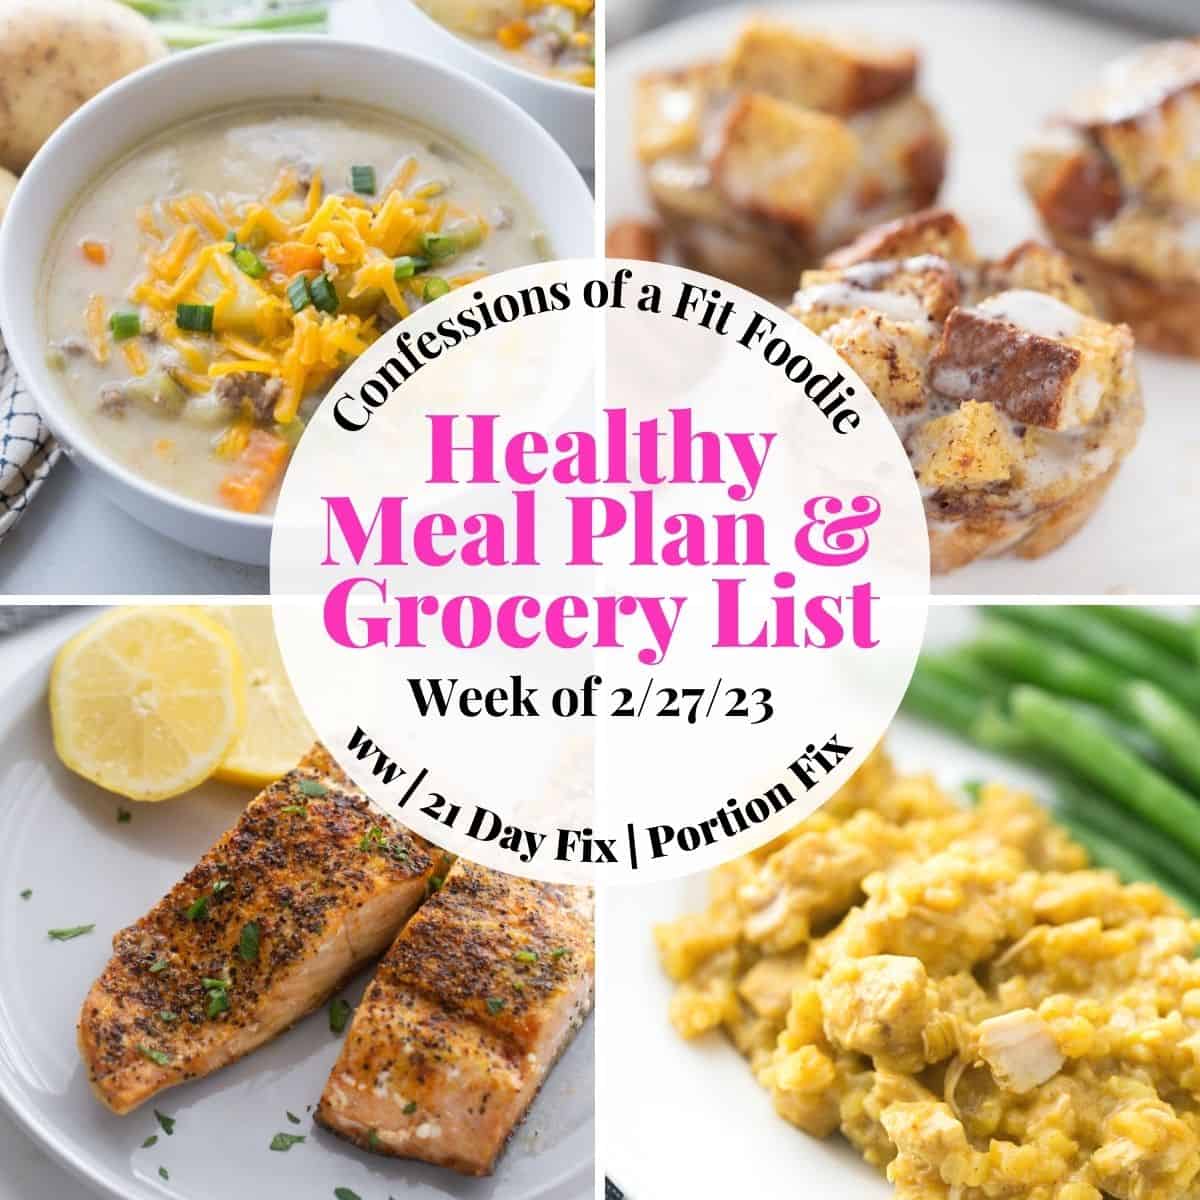 Healthy Dinner Meal Plan Week of 2/3/2020 {21 Day Fix